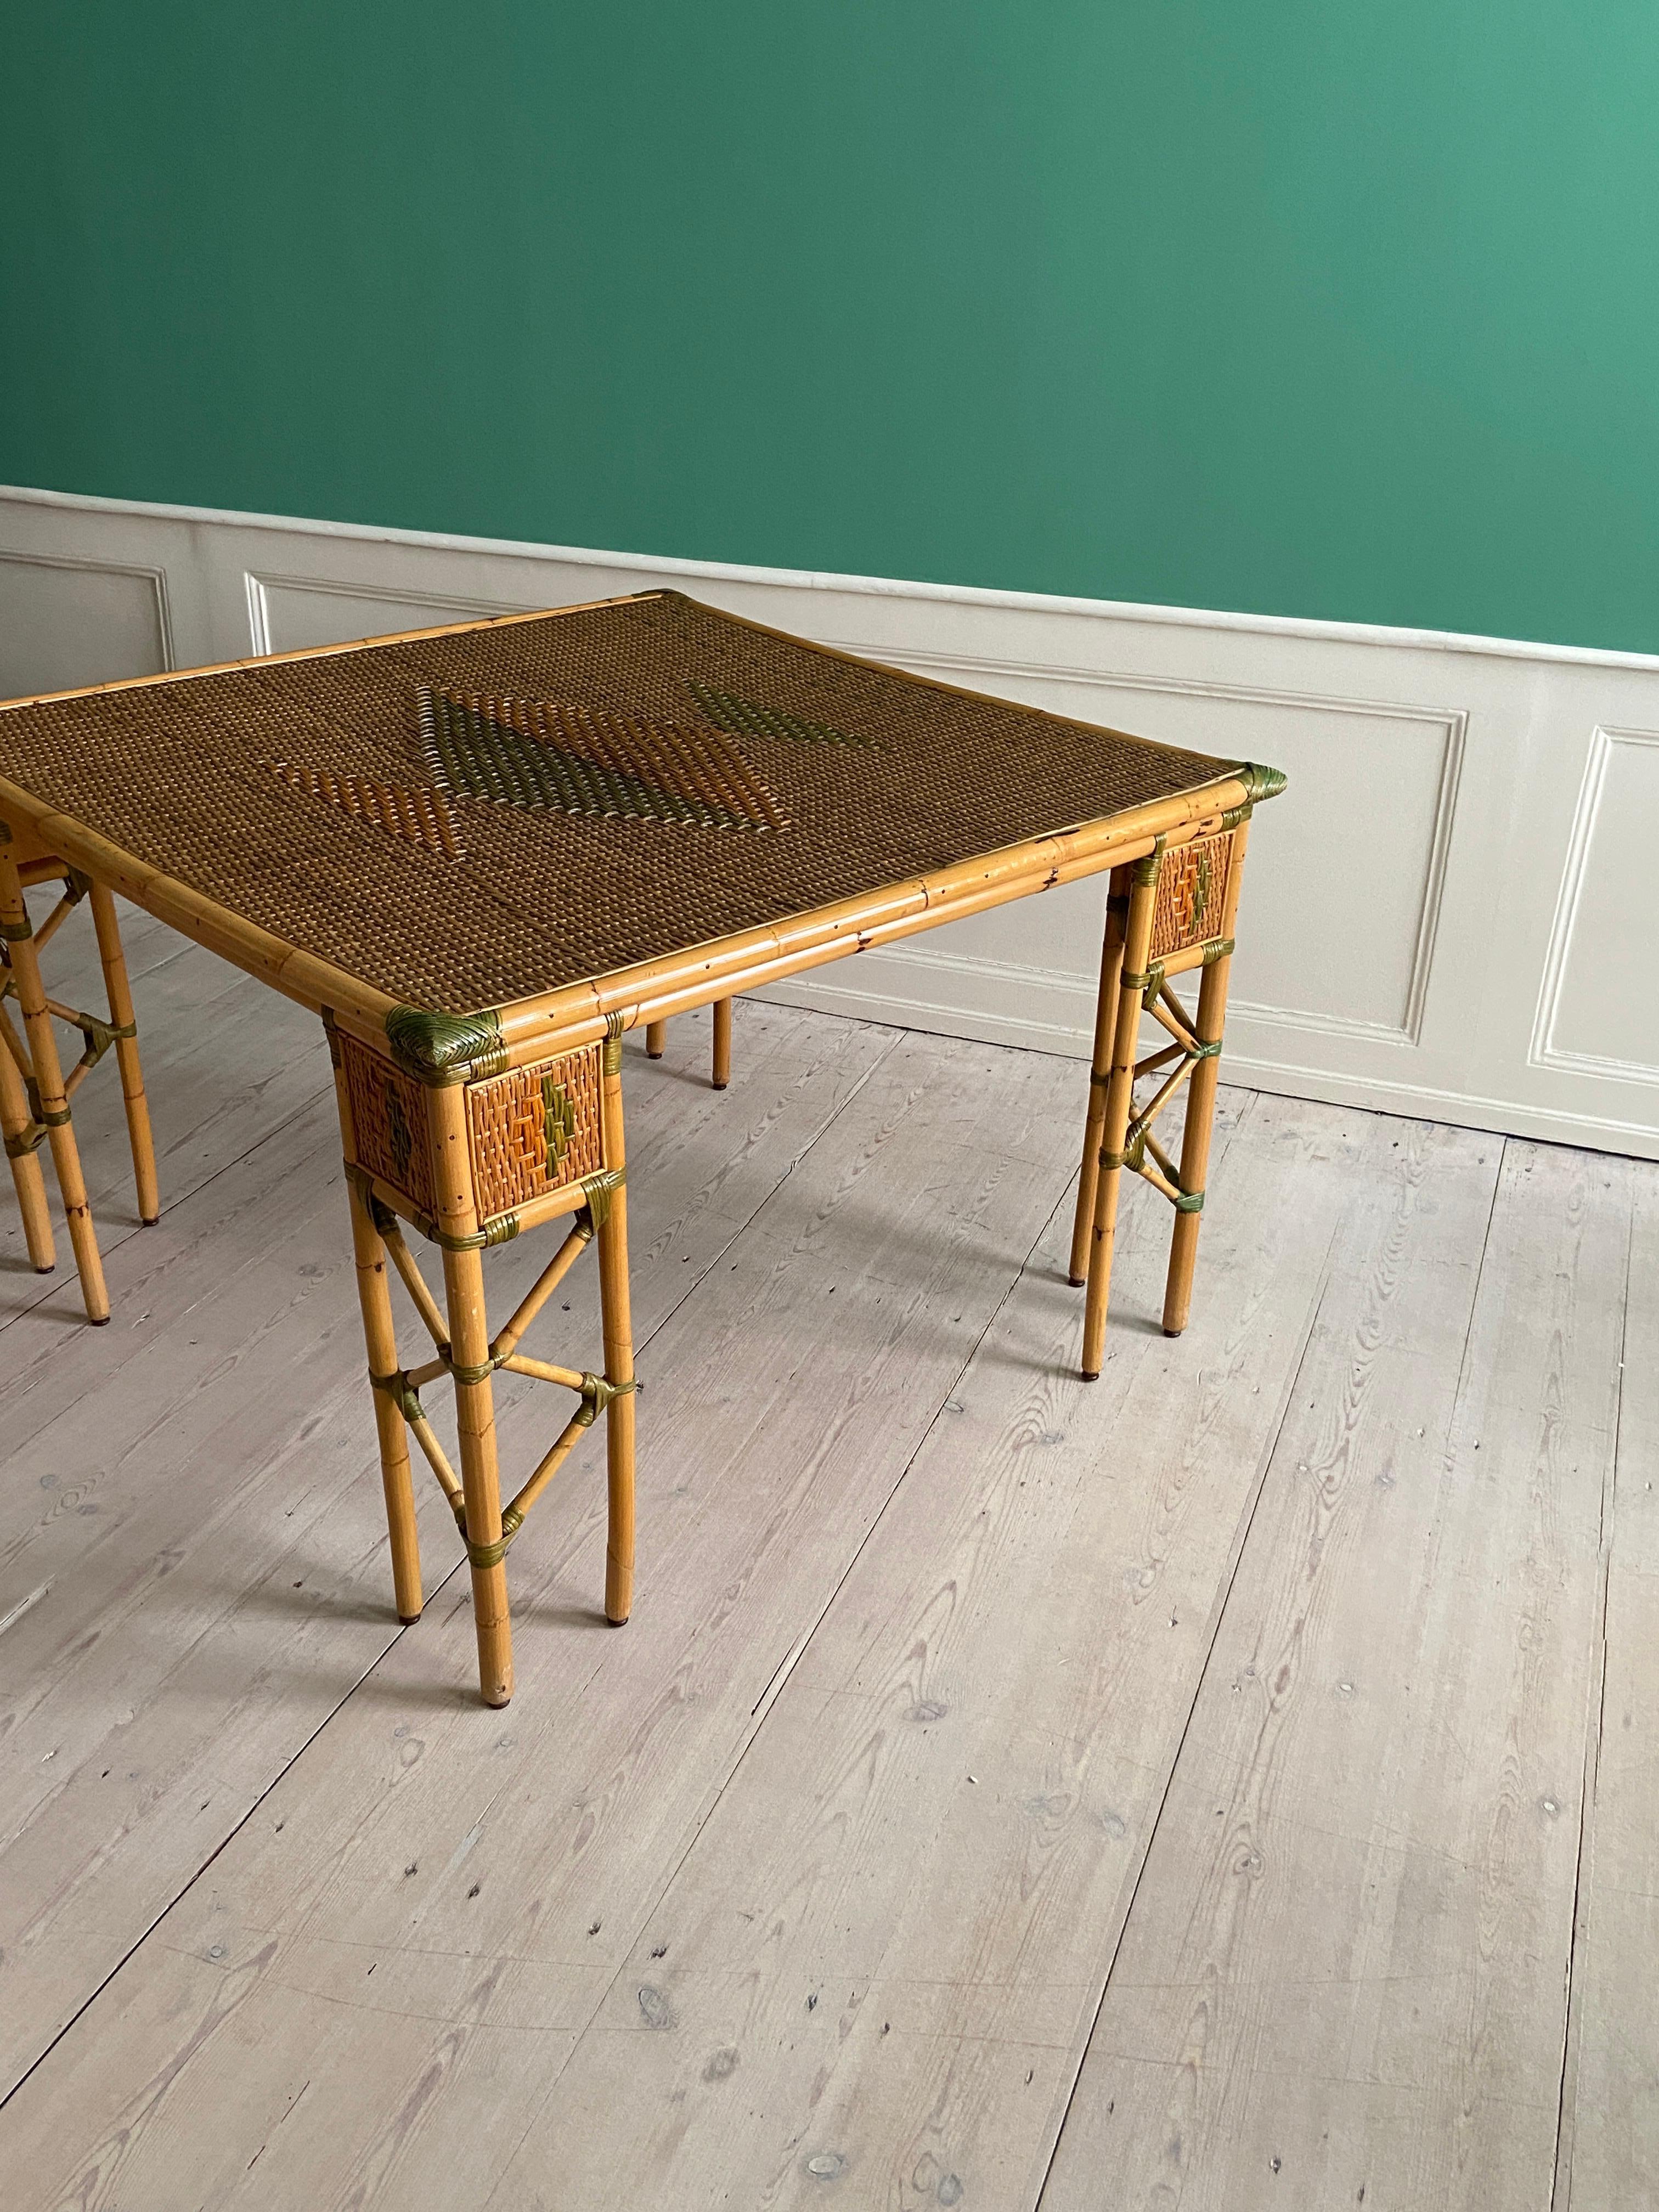 Vintage Woven Bamboo Table with Brass Details, France, Early 20th Century For Sale 6